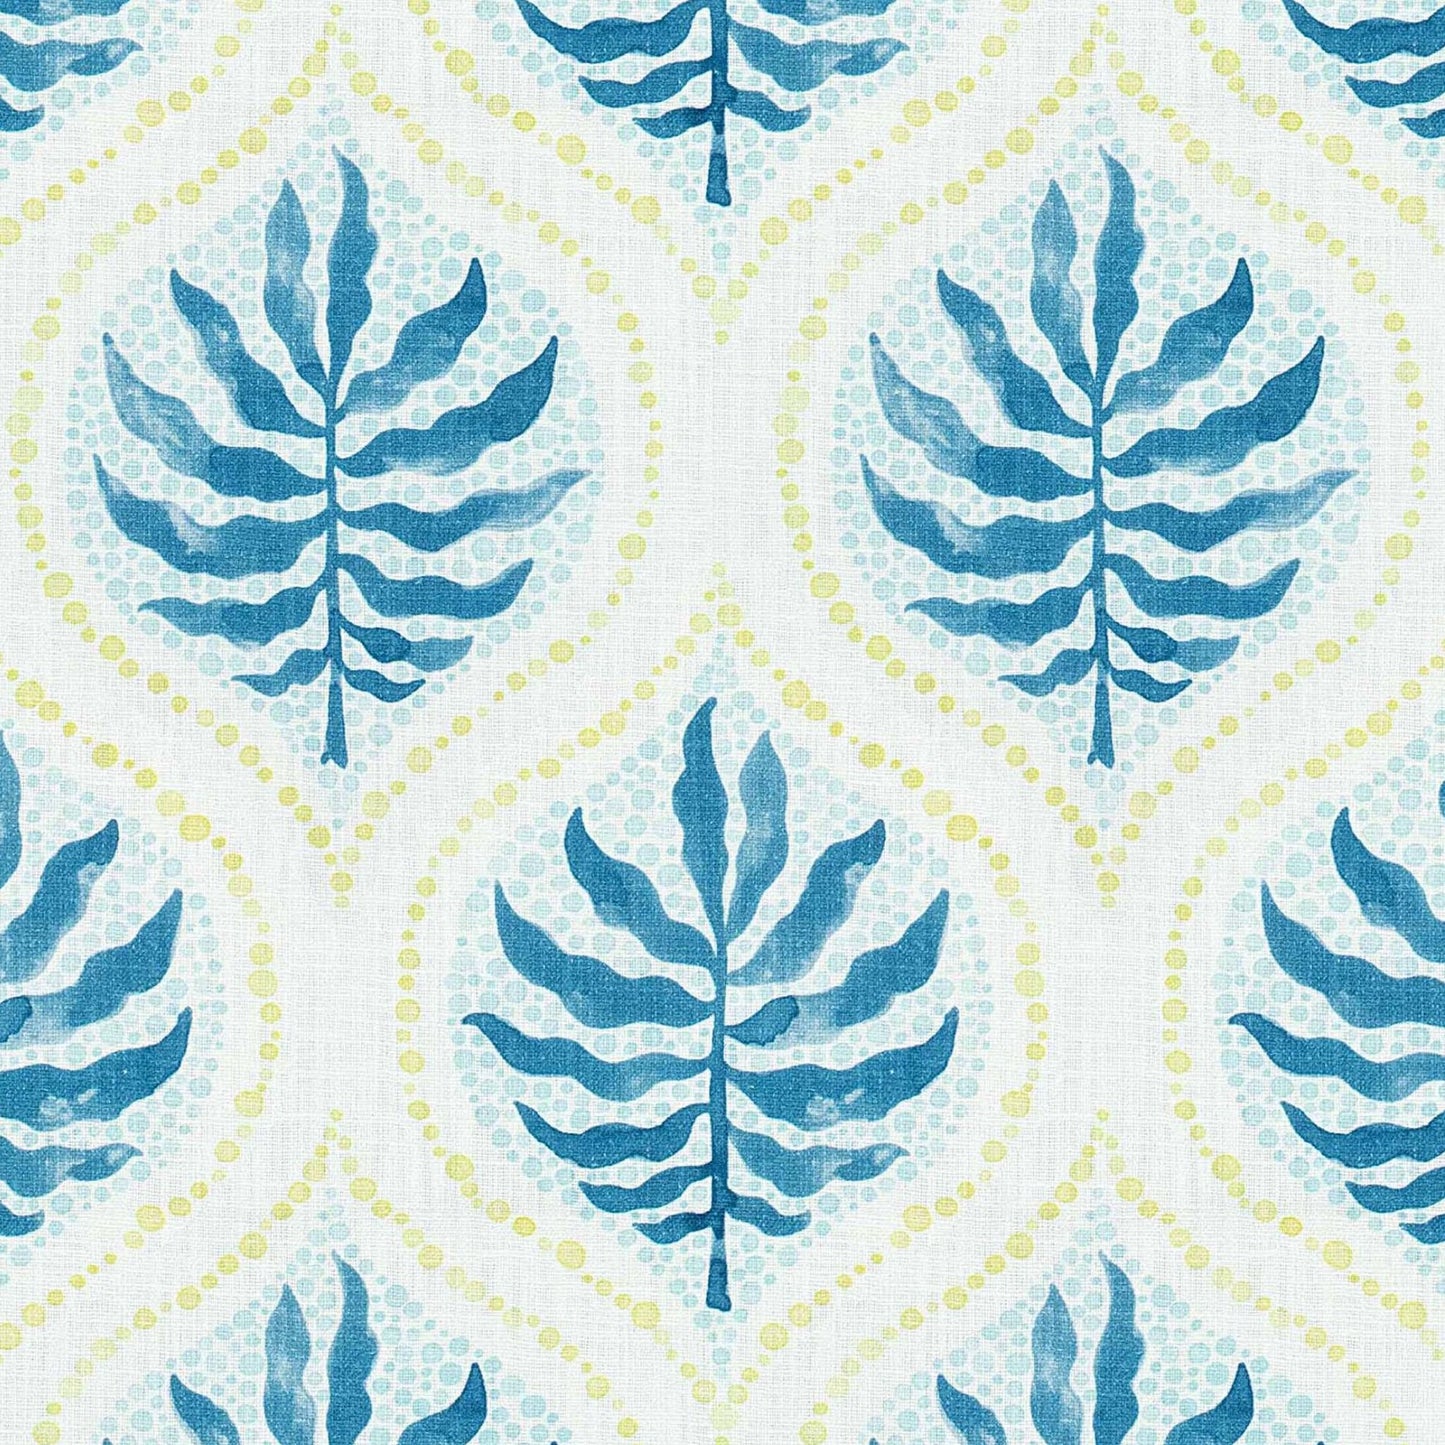 Bed Runner in Airlie Bluestone Blue and Lime Green Ogee Floral Watercolor